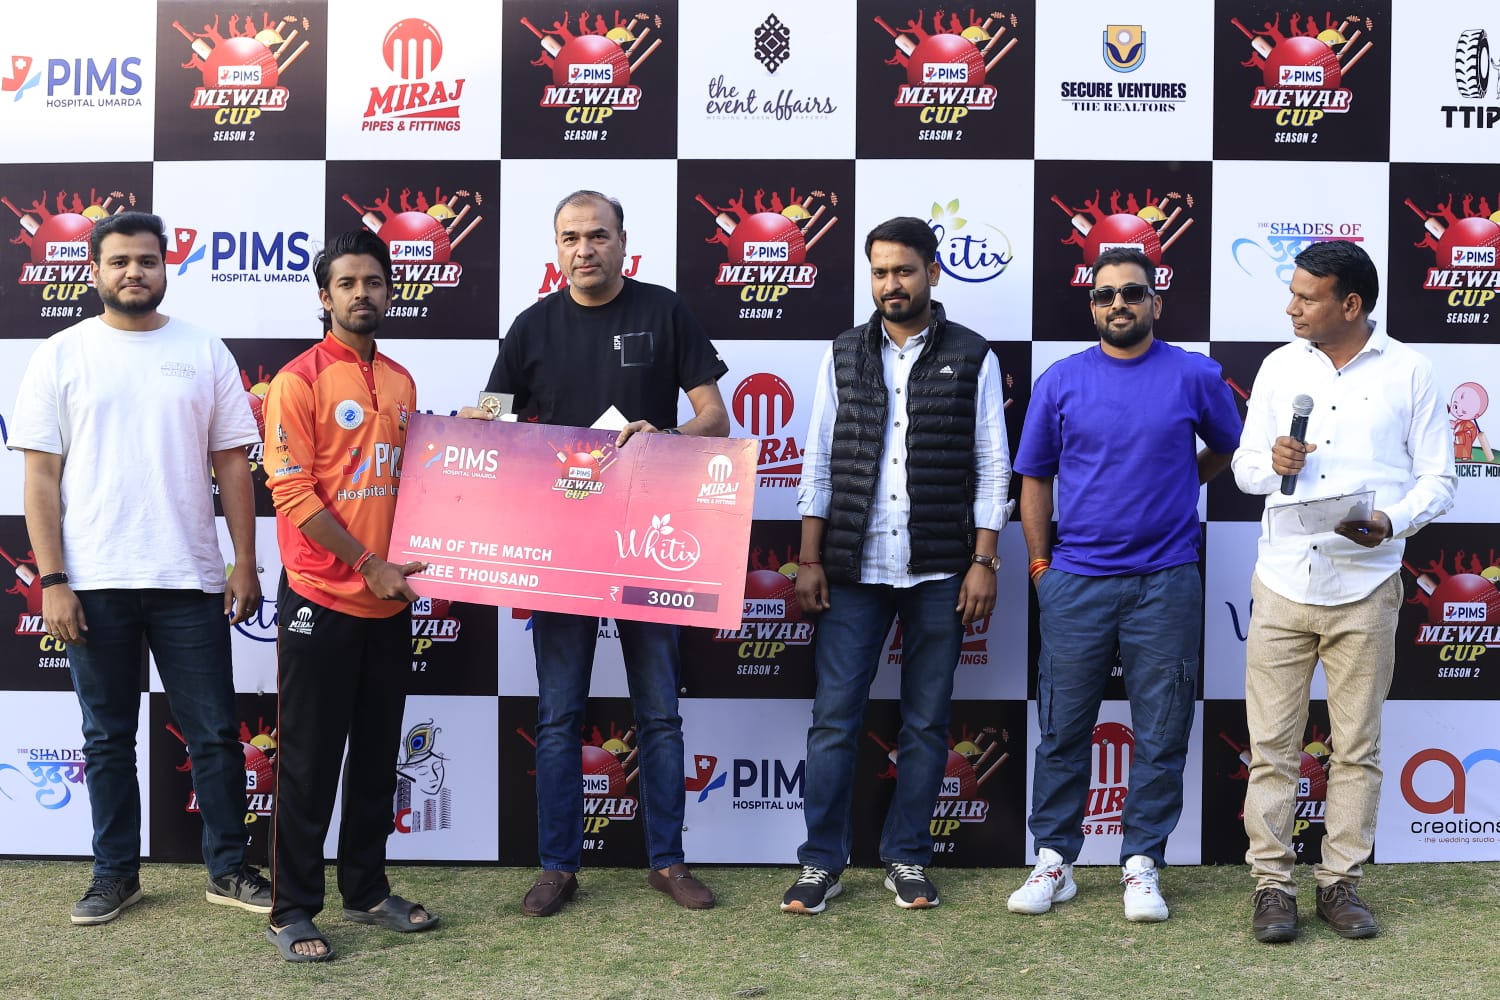 J.R. Cricket Academy Secures Victory Against Titans Club in Mevad Cup Tournament